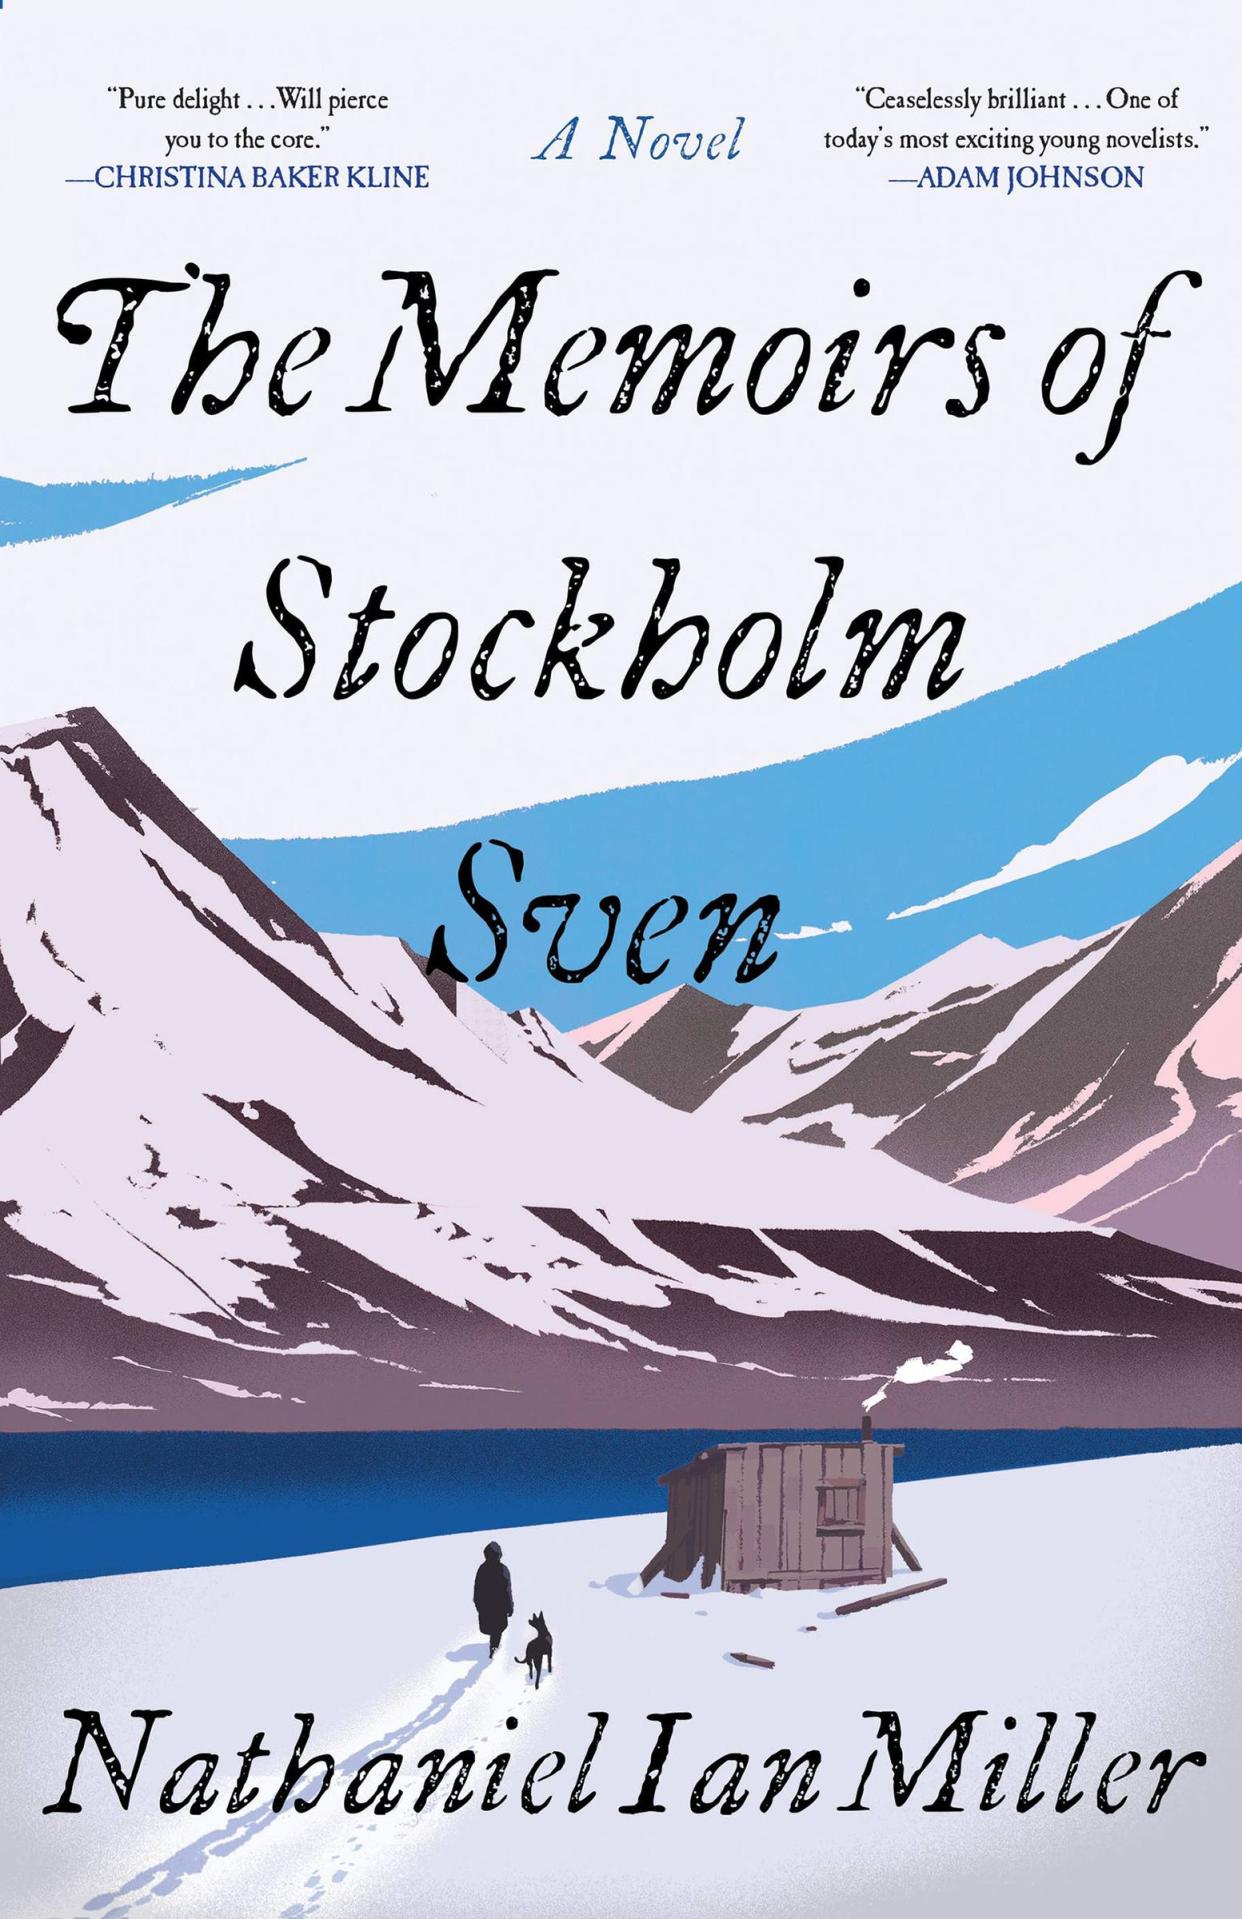 “The Memoirs of Stockholm Sven” by Nathaniel Ian Miller.